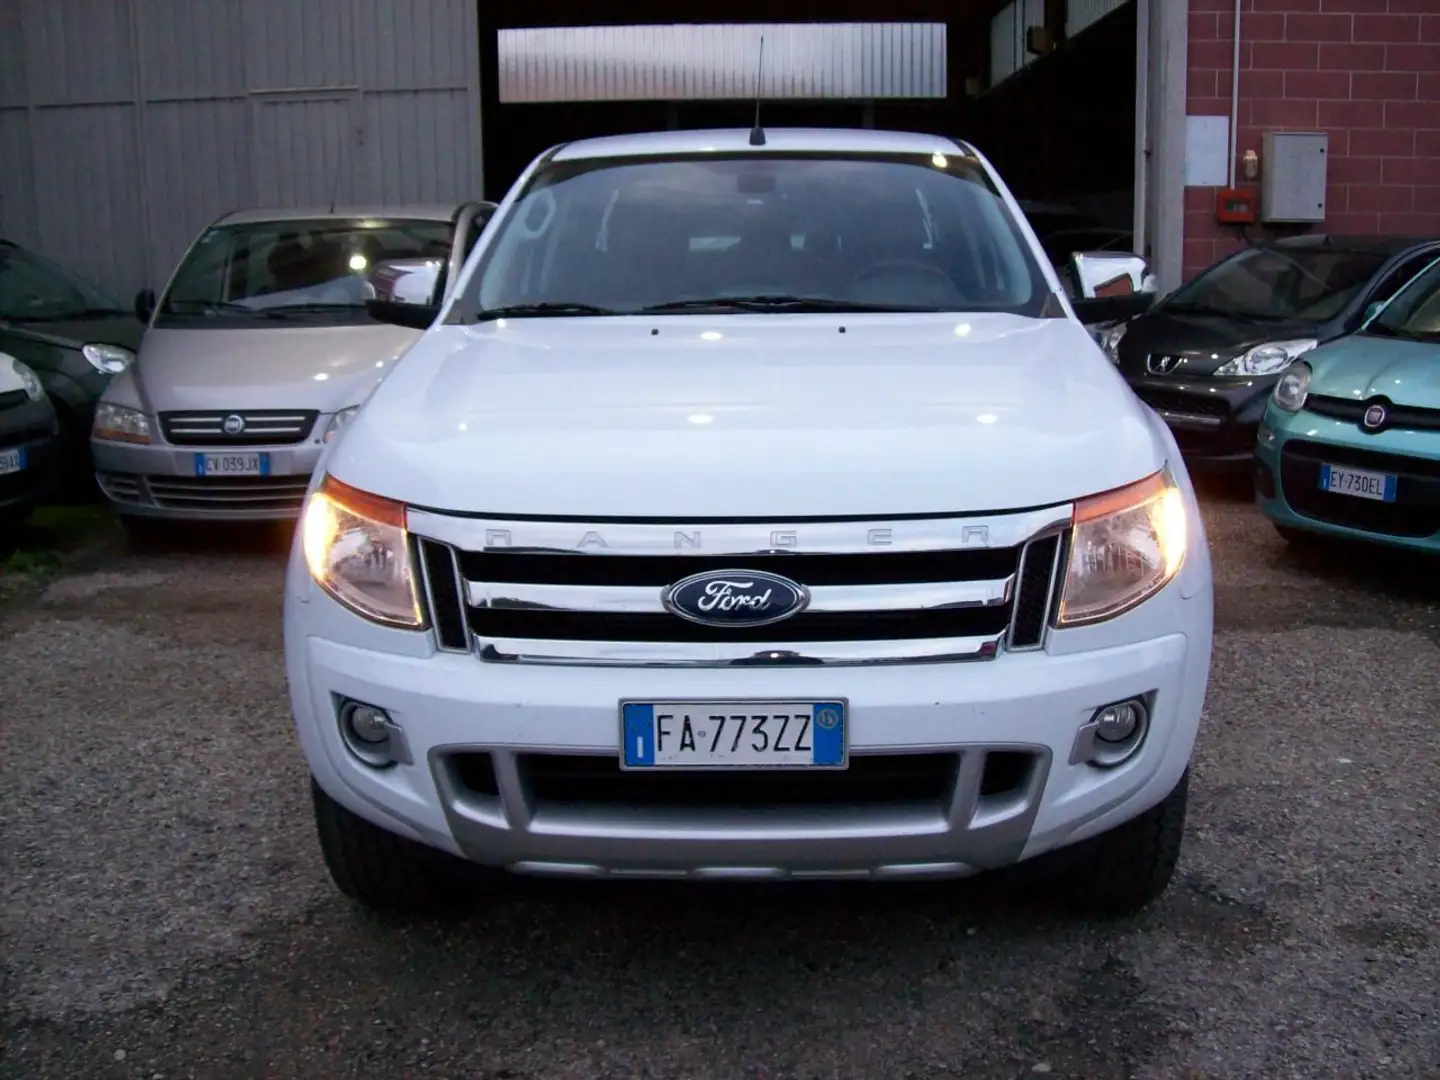 Ford Ranger Ranger 2.2 tdci double cab Limited auto Blanco - 1